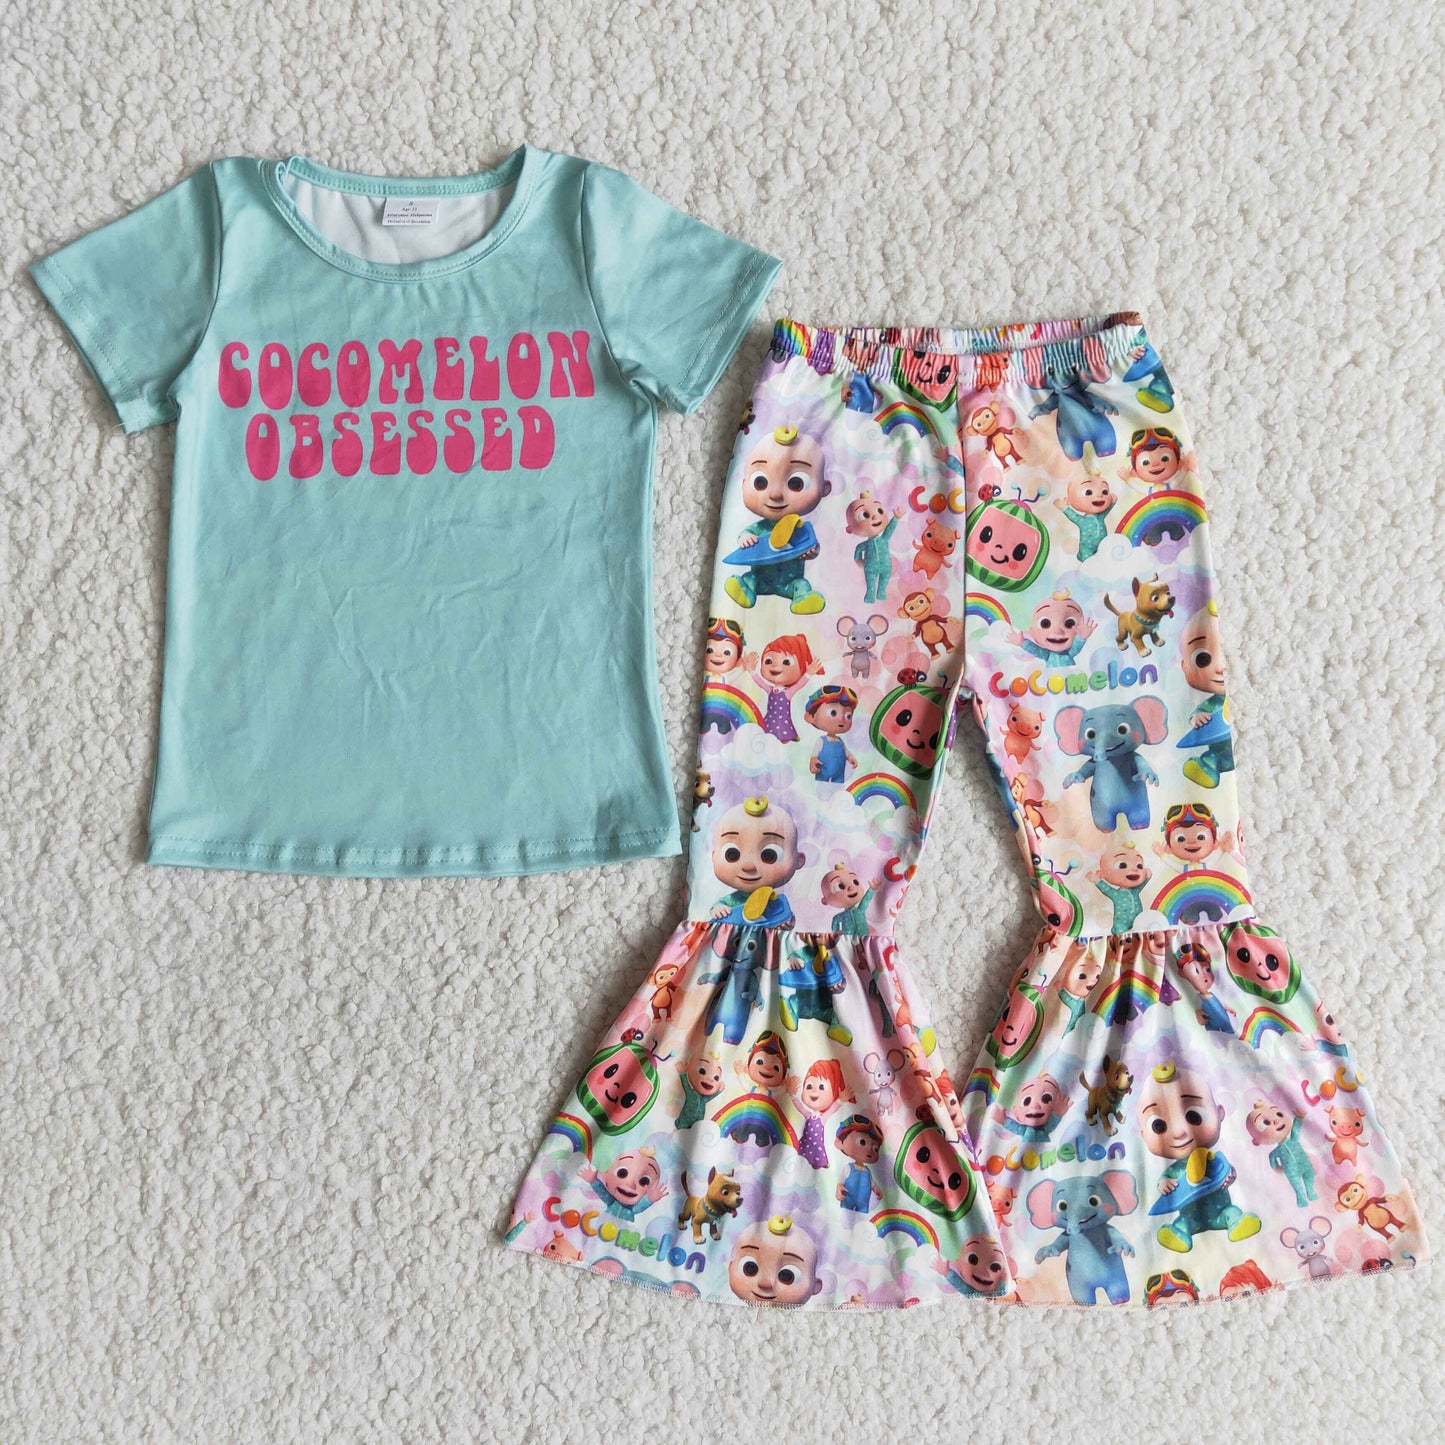 cocomelon obsessed bells outfit